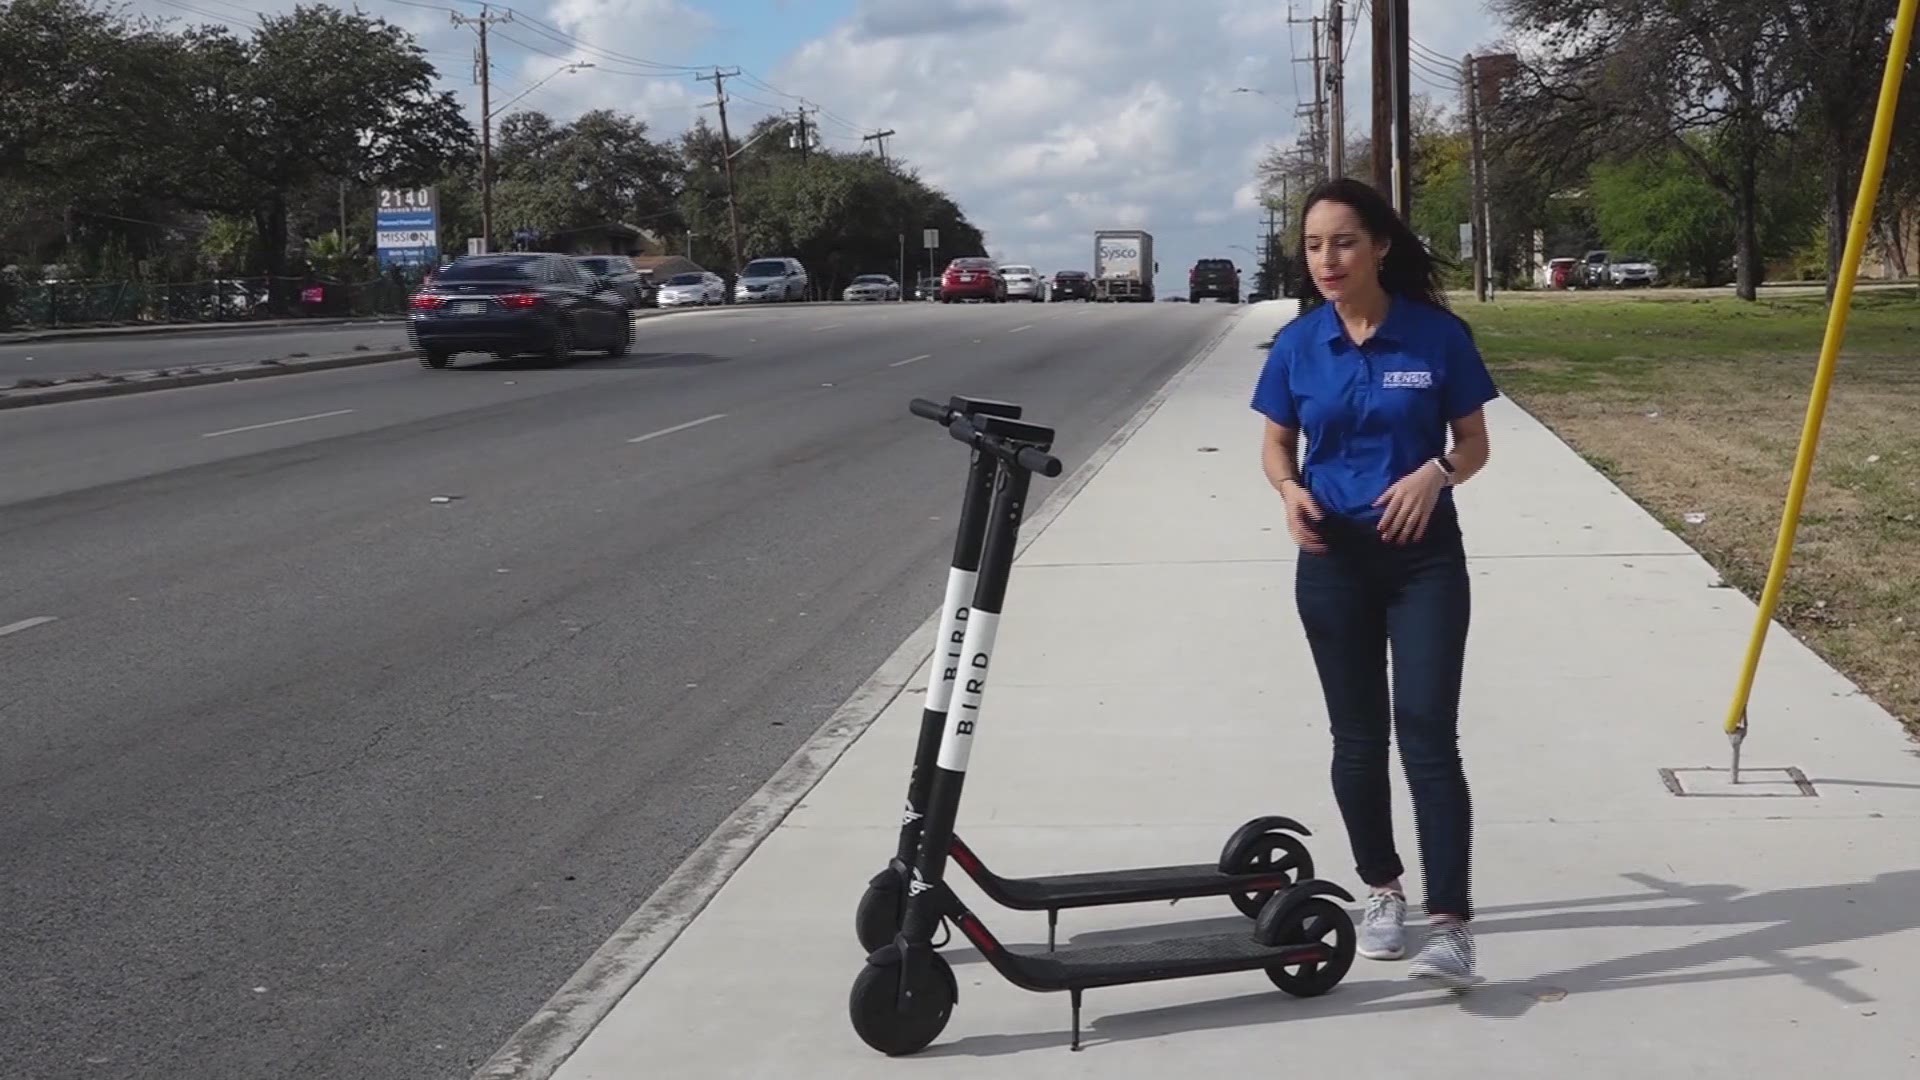 Hospital trips, broken bones and concussions - doctors say those are just some of the serious injuries they're seeing from riders on dockless scooters. Eyewitness News reporter Adi Guajardo explains.